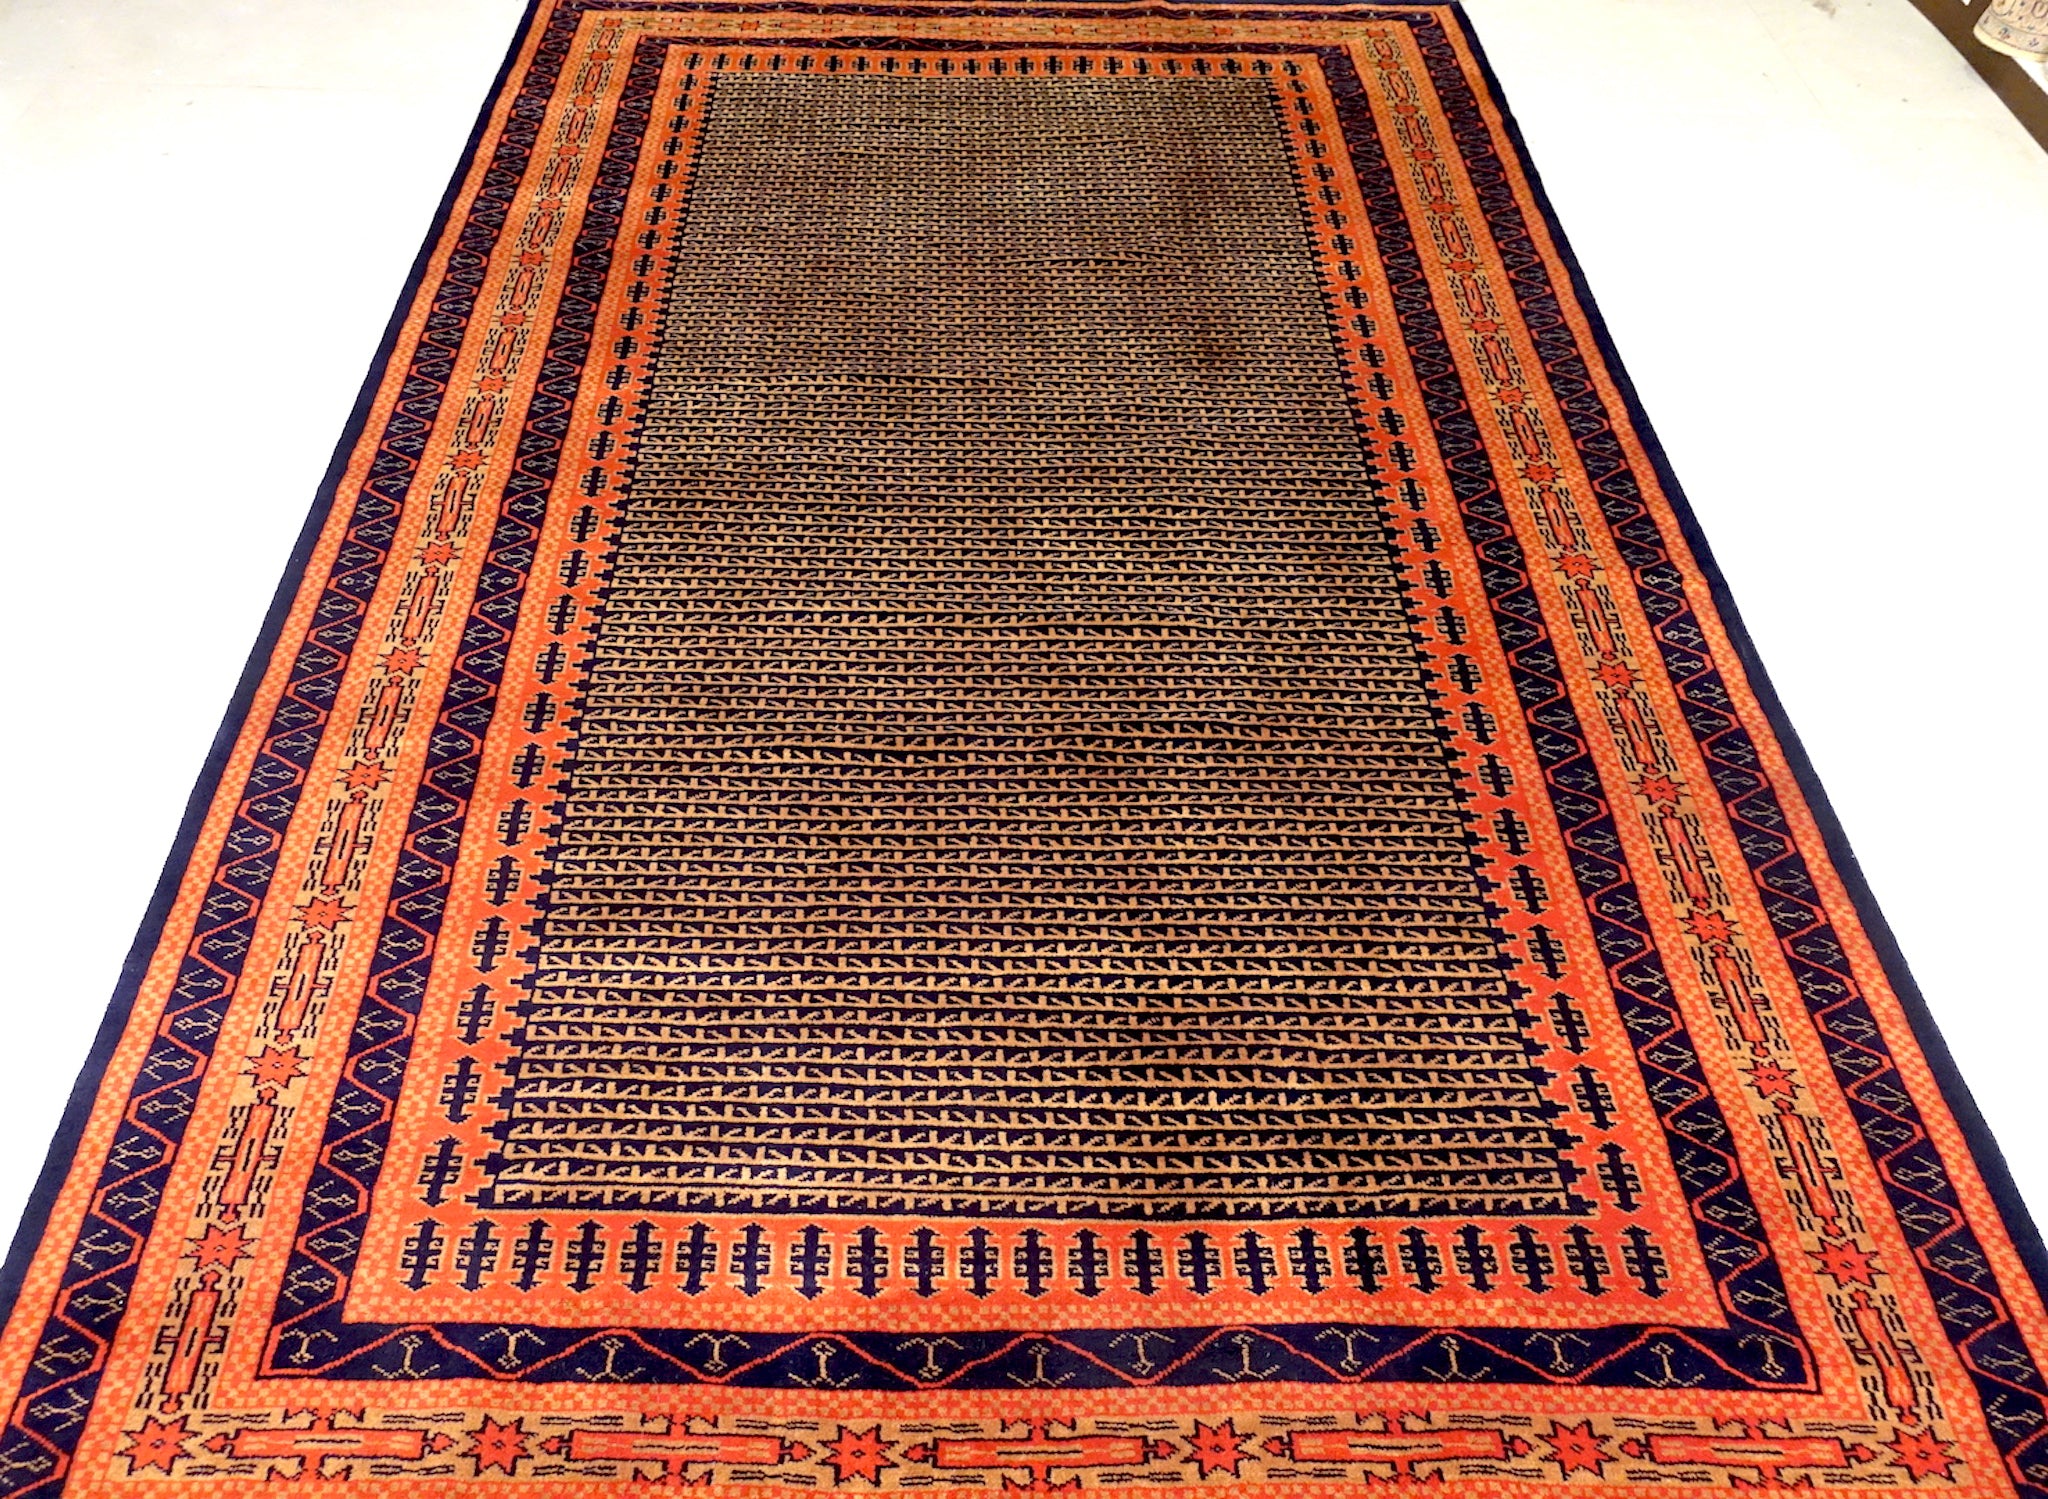 A 6 feet by 9 feet indian wool rug, the colours used on the rug are rust,brown,orange and dark blue.